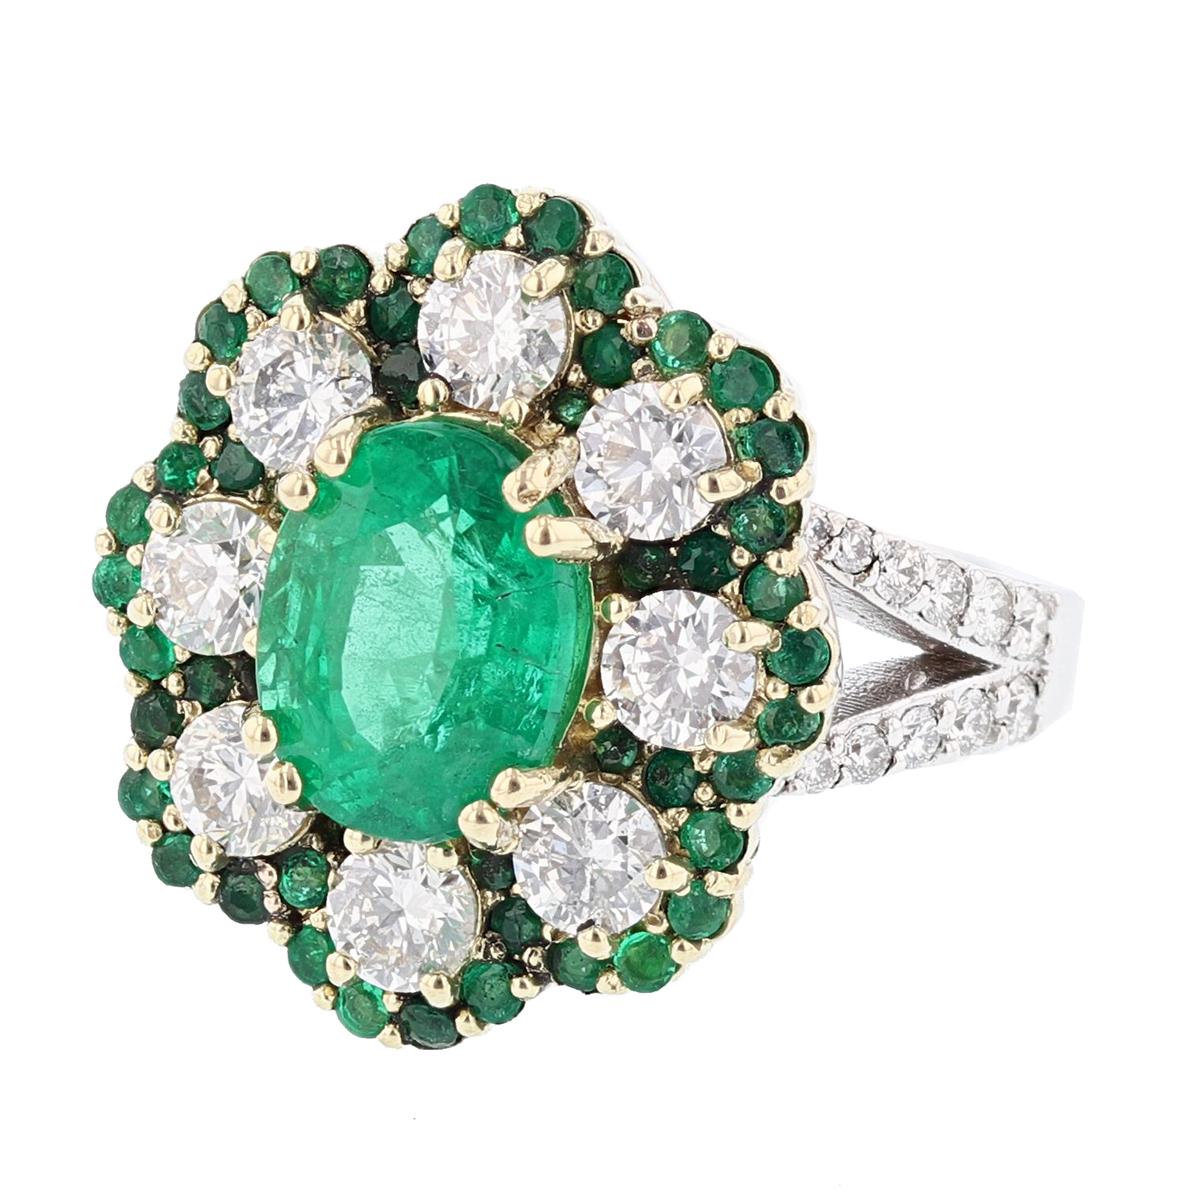 This ring is made in 18 karat white and yellow gold and features a 2.66ct oval cut emerald. The ring also features a diamond halo with 8 round cut diamonds, prong set weighing 1.51cts; and 48 round cut emeralds, prong set weighing 0.68cts; and a